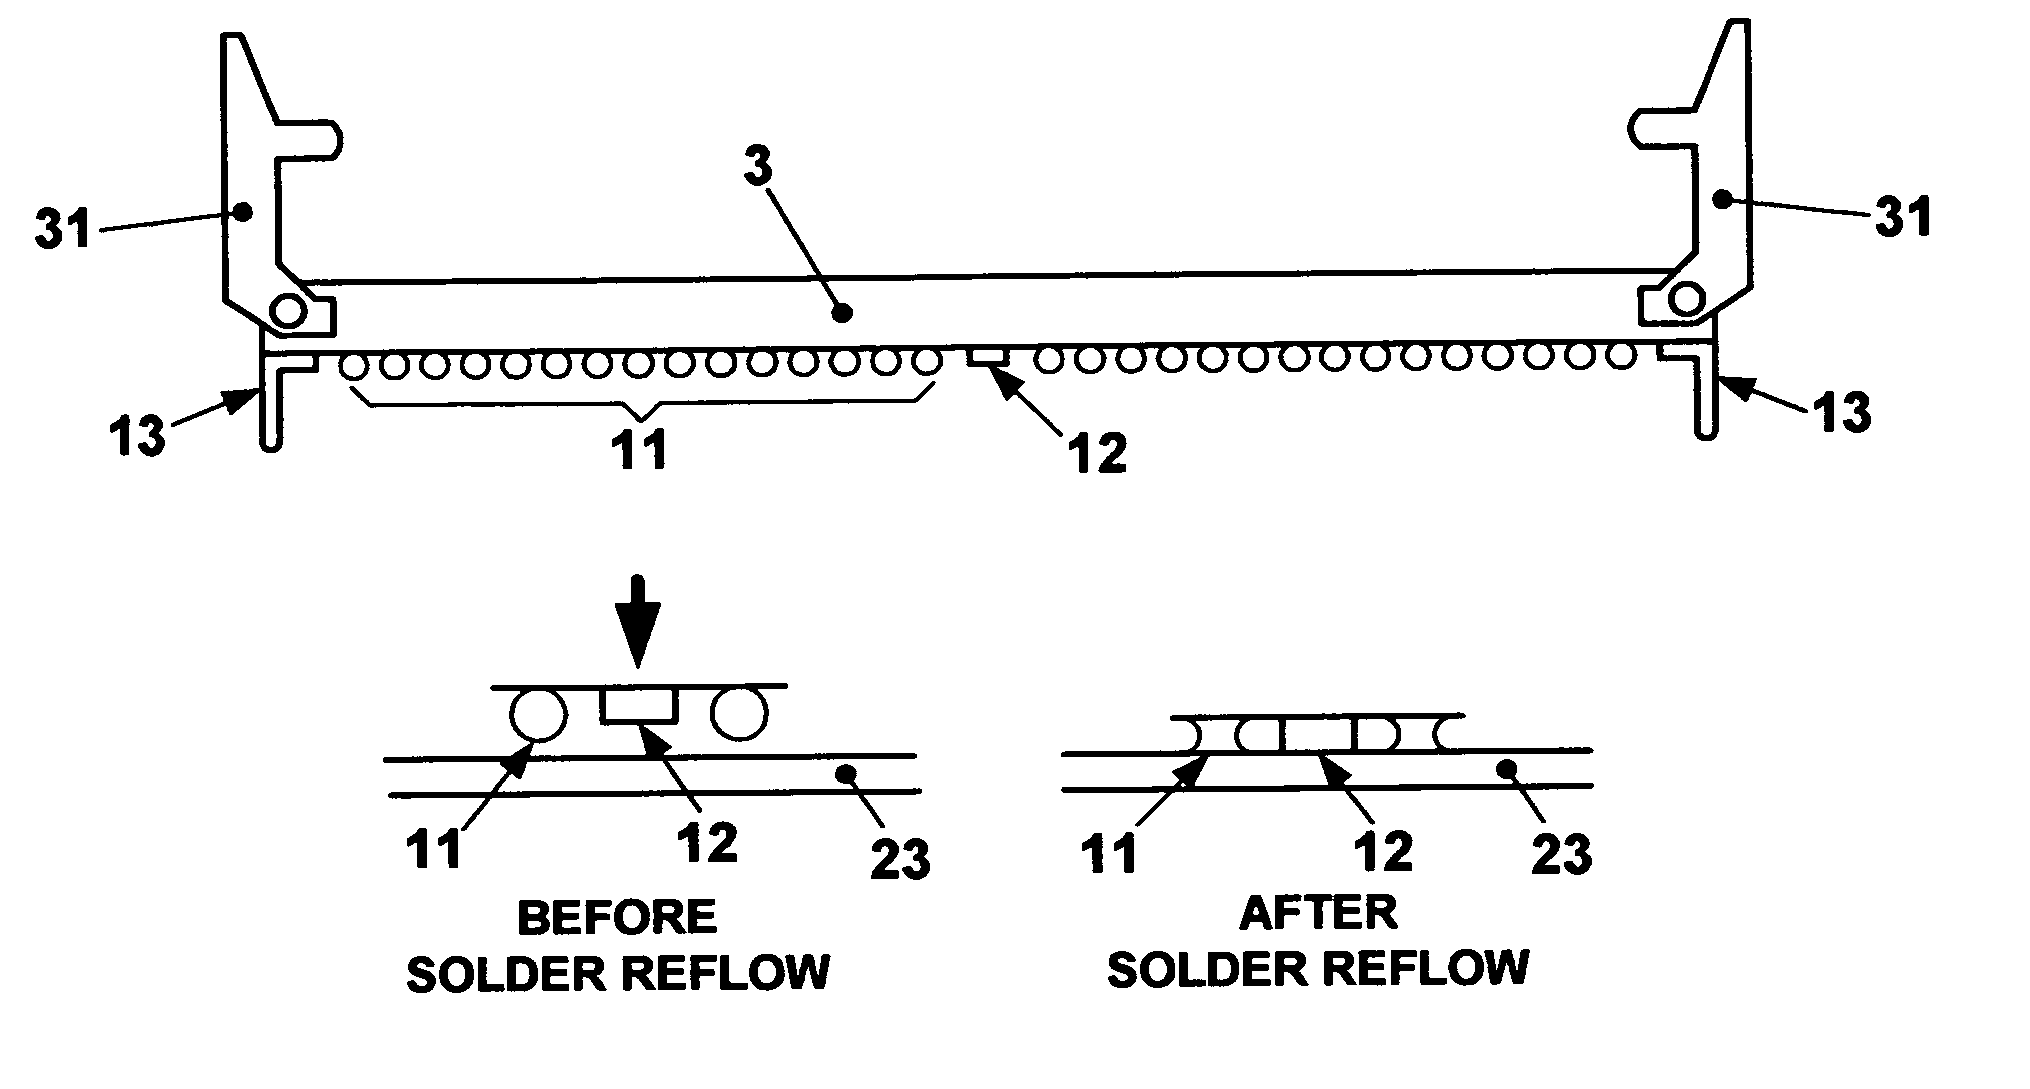 Edge card connector having solder balls and related methods